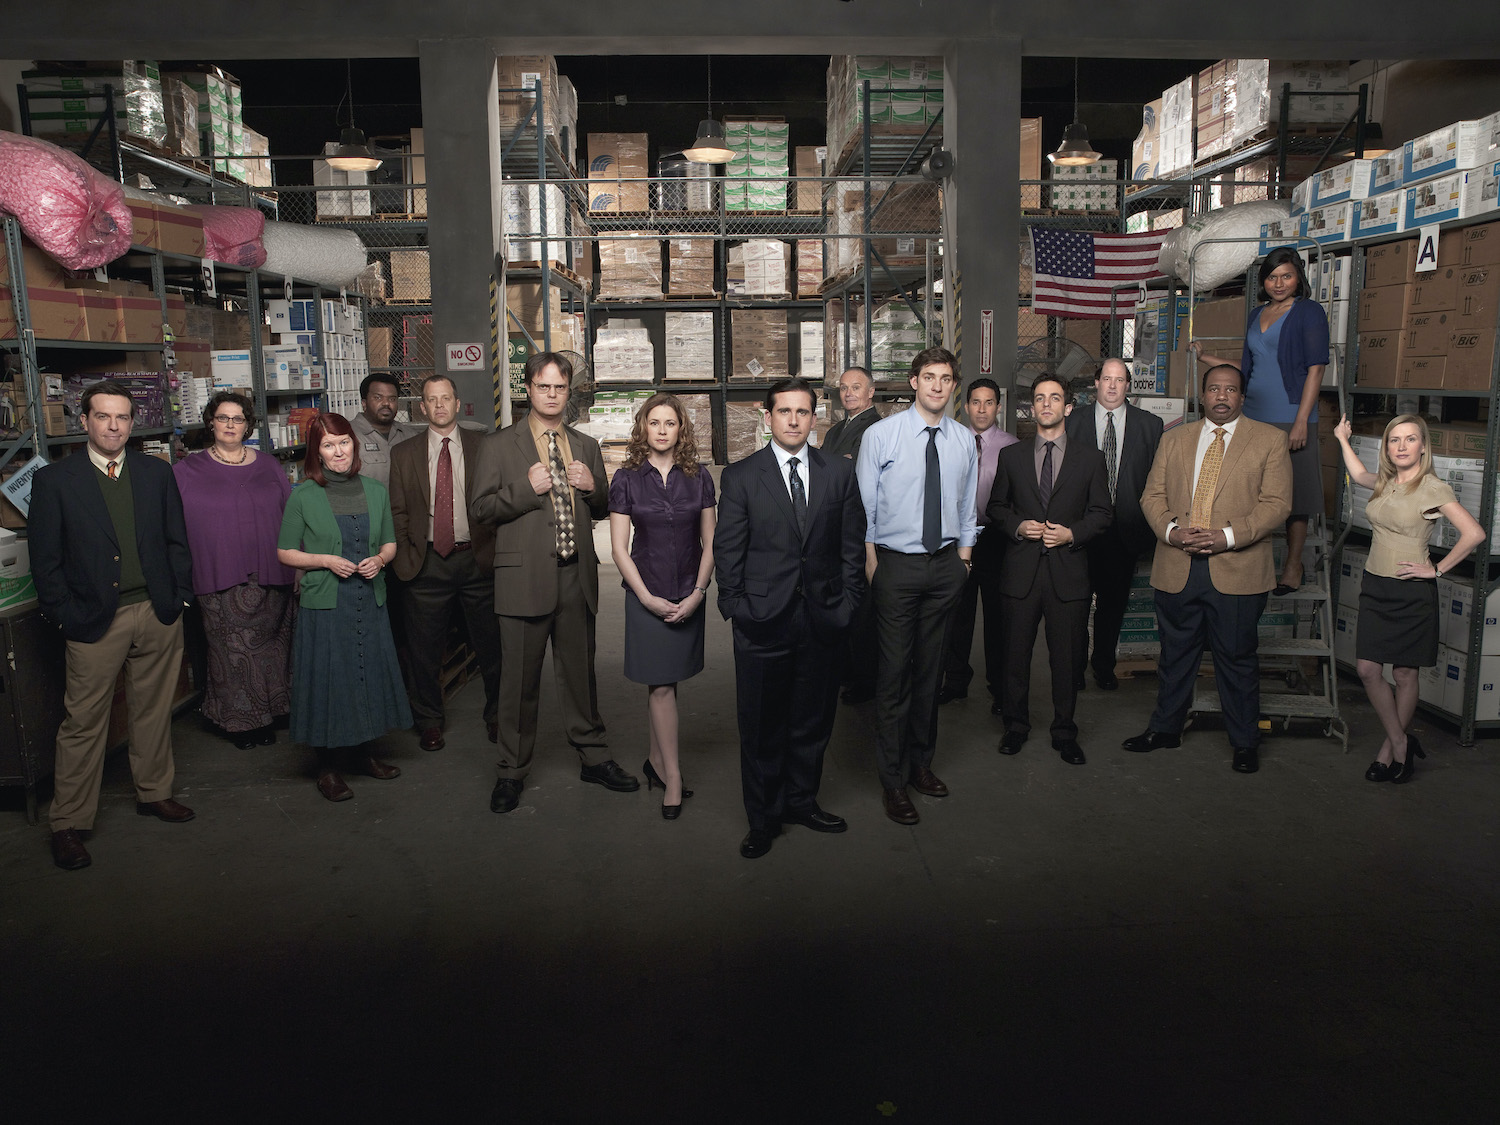 The Office cast poses in the warehouse